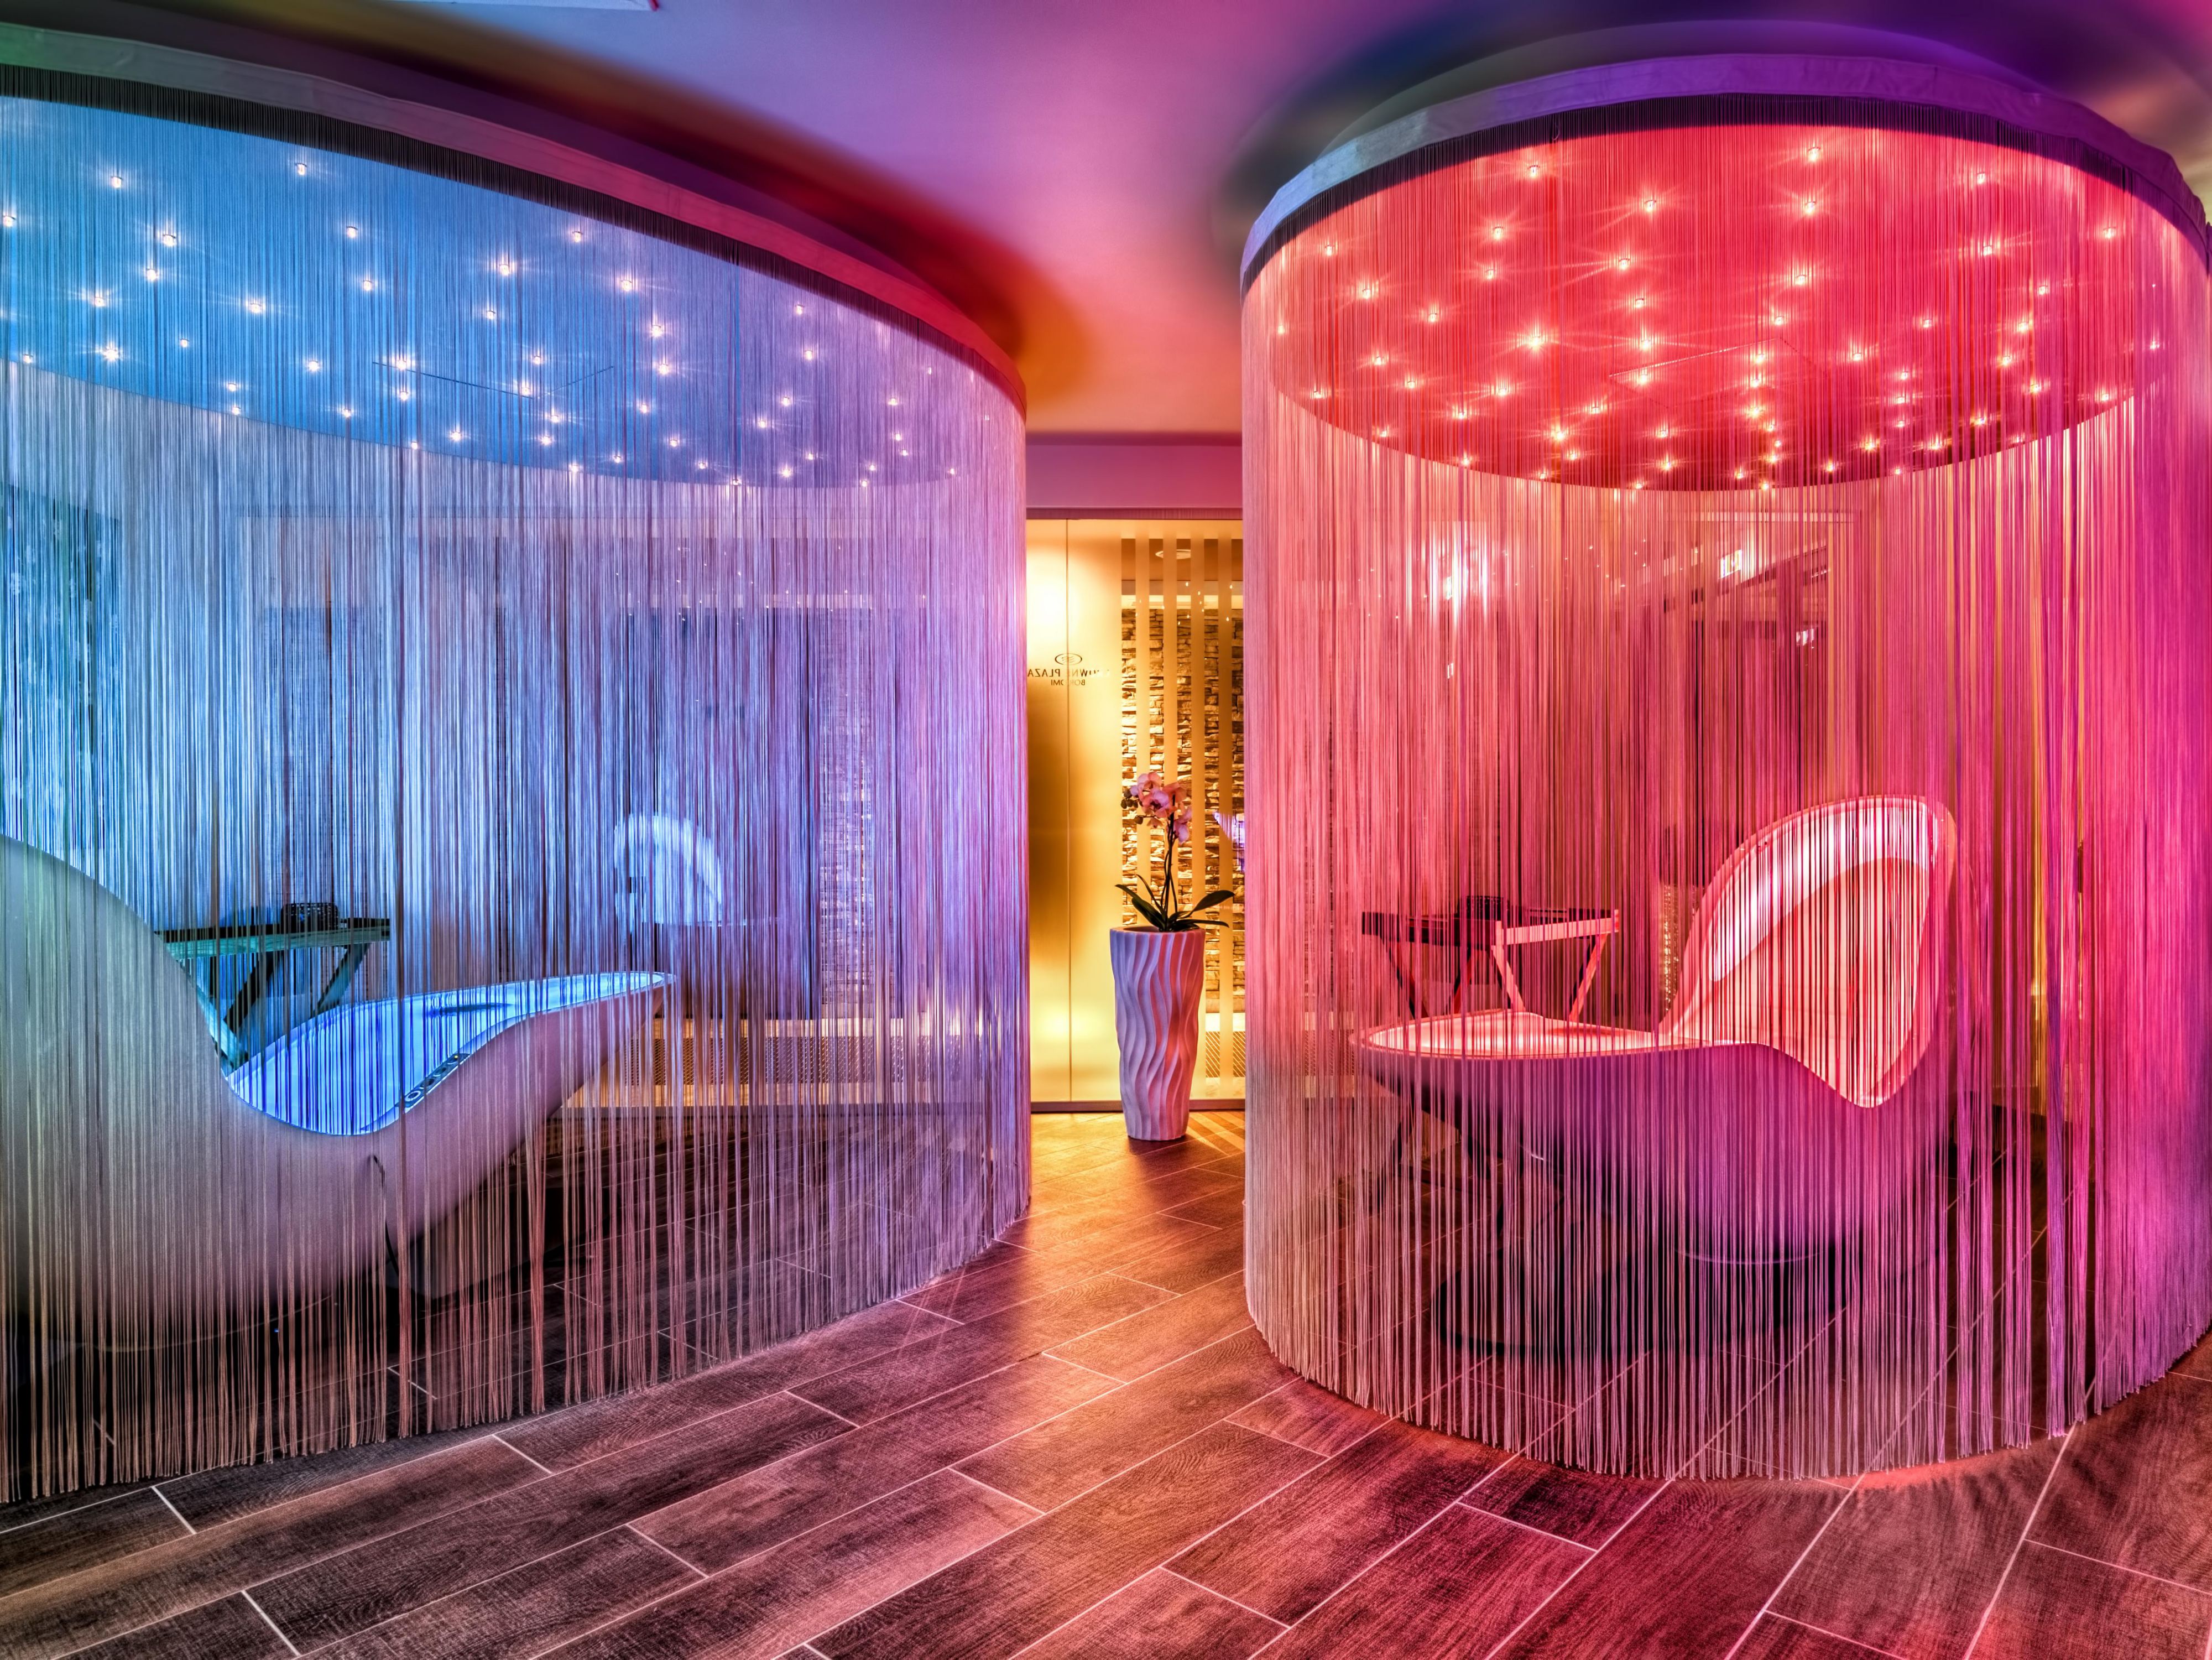 Exclusive Wellness & Spa Centre (2.400 sq m.) offers leisure facilities like a swimming pool, saunas, steam rooms, and different relaxing areas, as well as an array of SPA treatments to satisfy the most discerning tastes and needs.